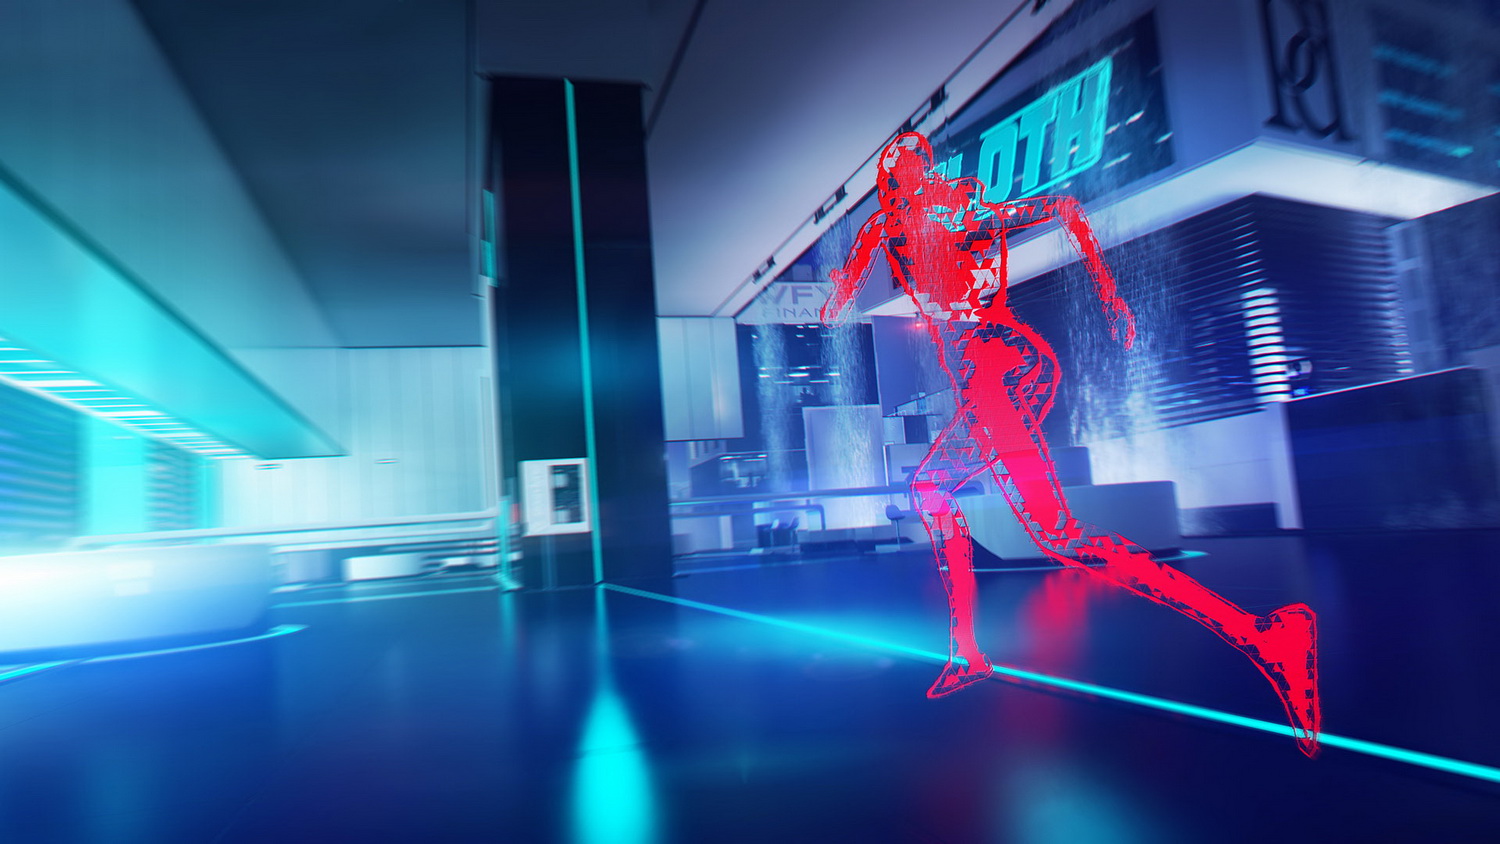 Mirror's Edge Catalyst is the parkour game we always wanted